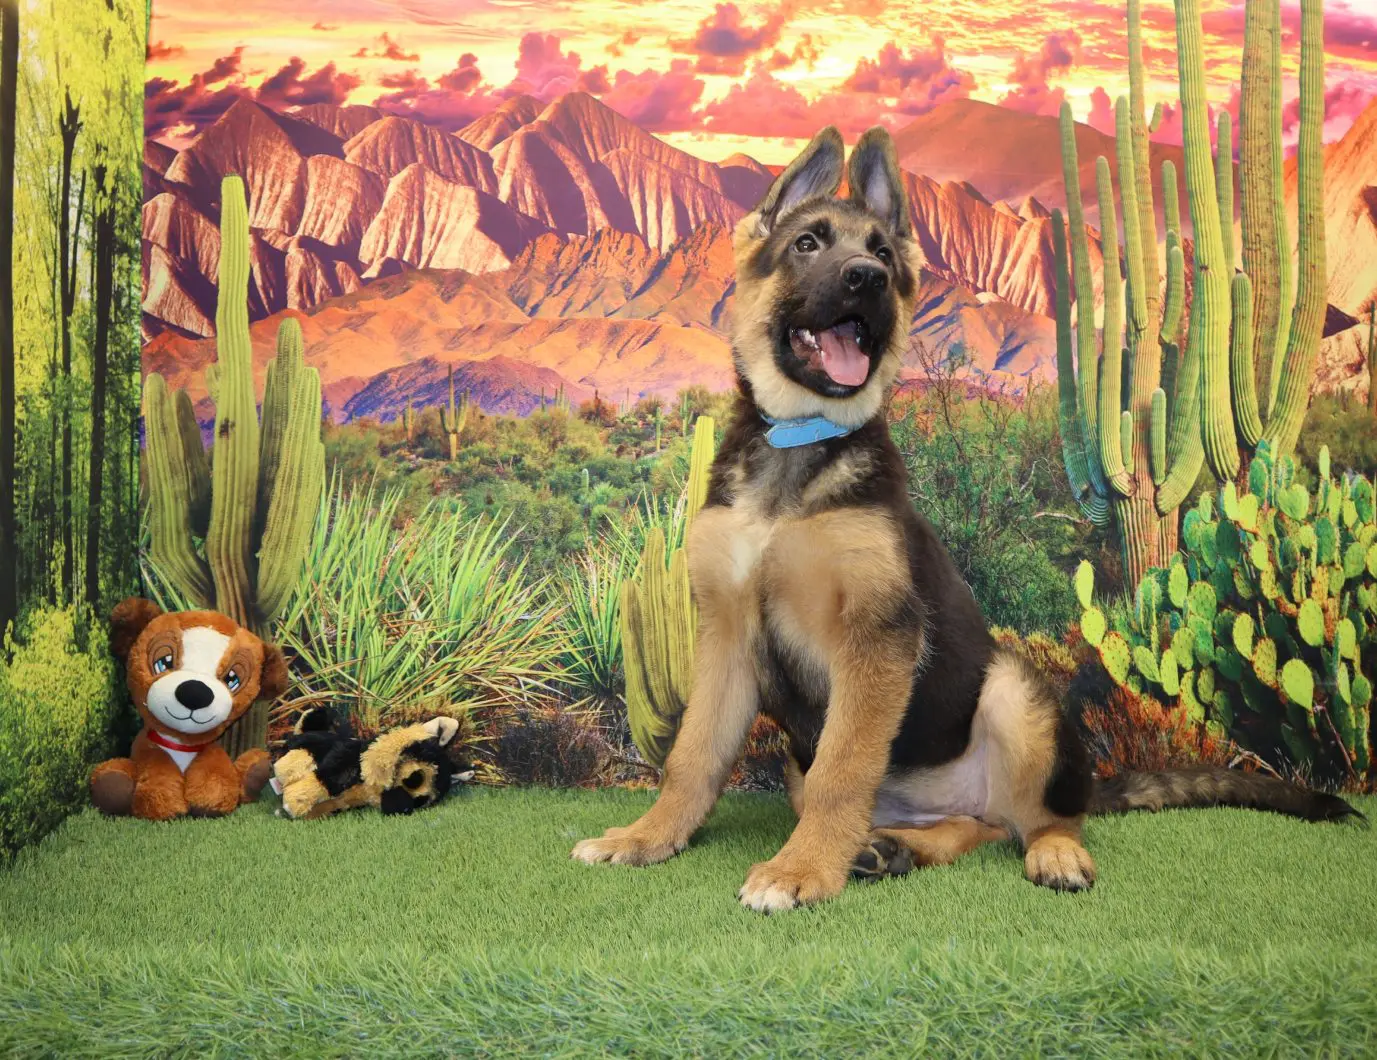 A dog sitting in front of a cactus wall.